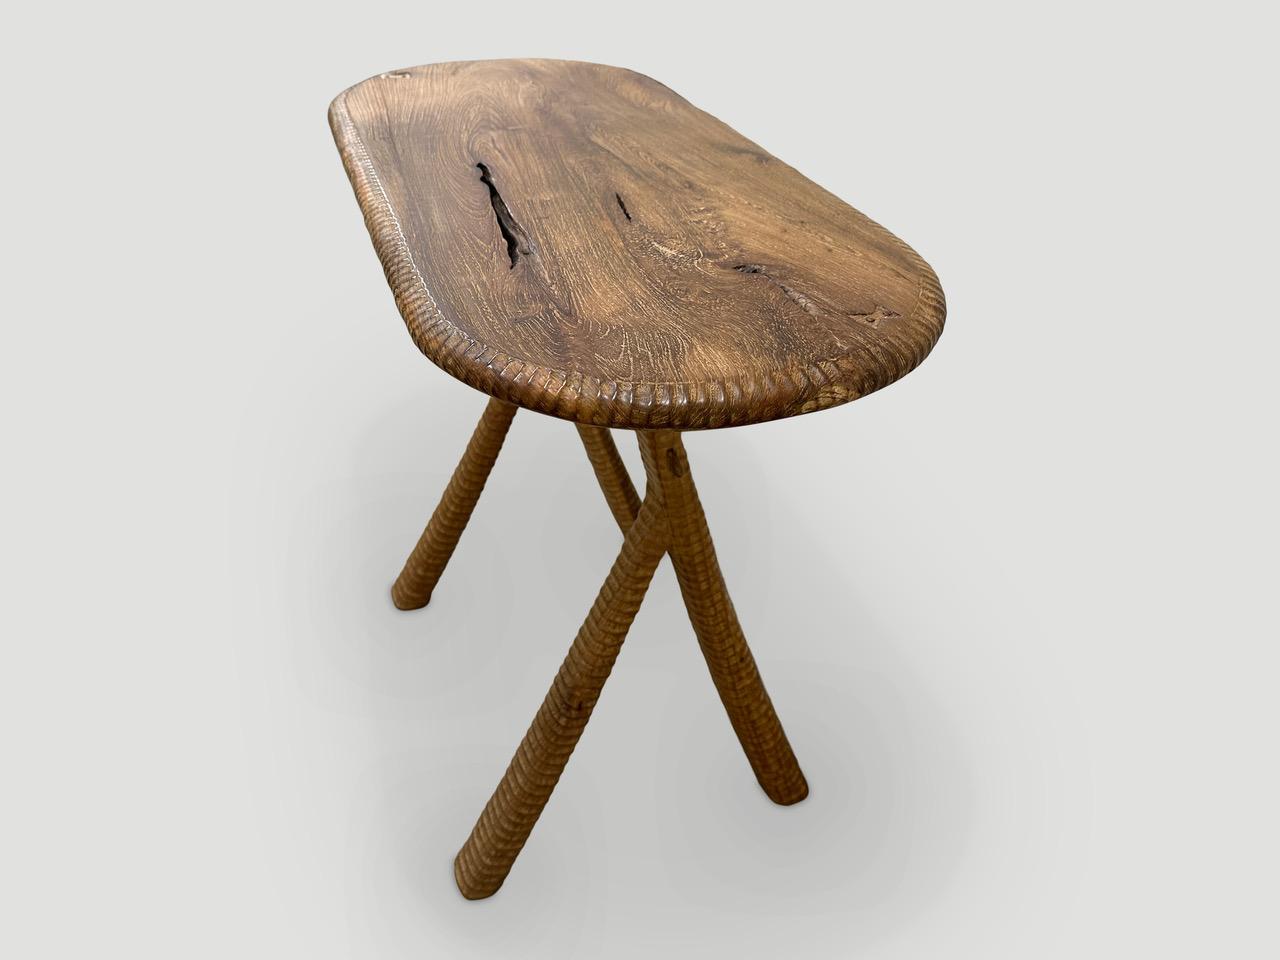 Andrianna Shamaris Midcentury Couture Teak Wood Side Table In Excellent Condition For Sale In New York, NY